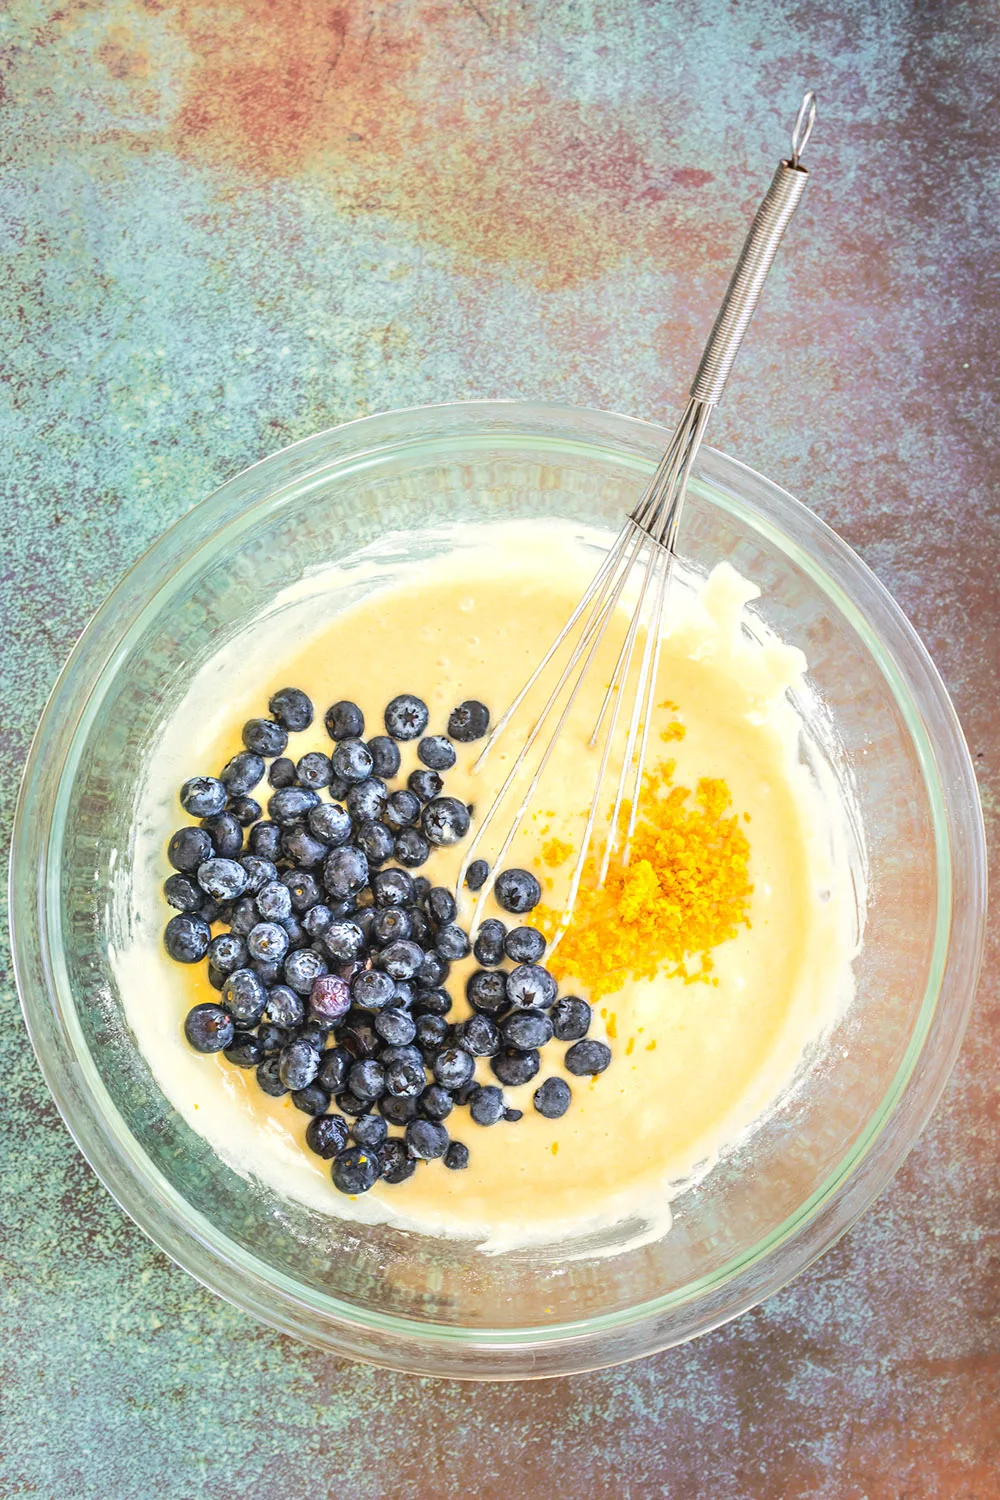 Blueberries and orange zest in muffin batter in a mixing bowl.